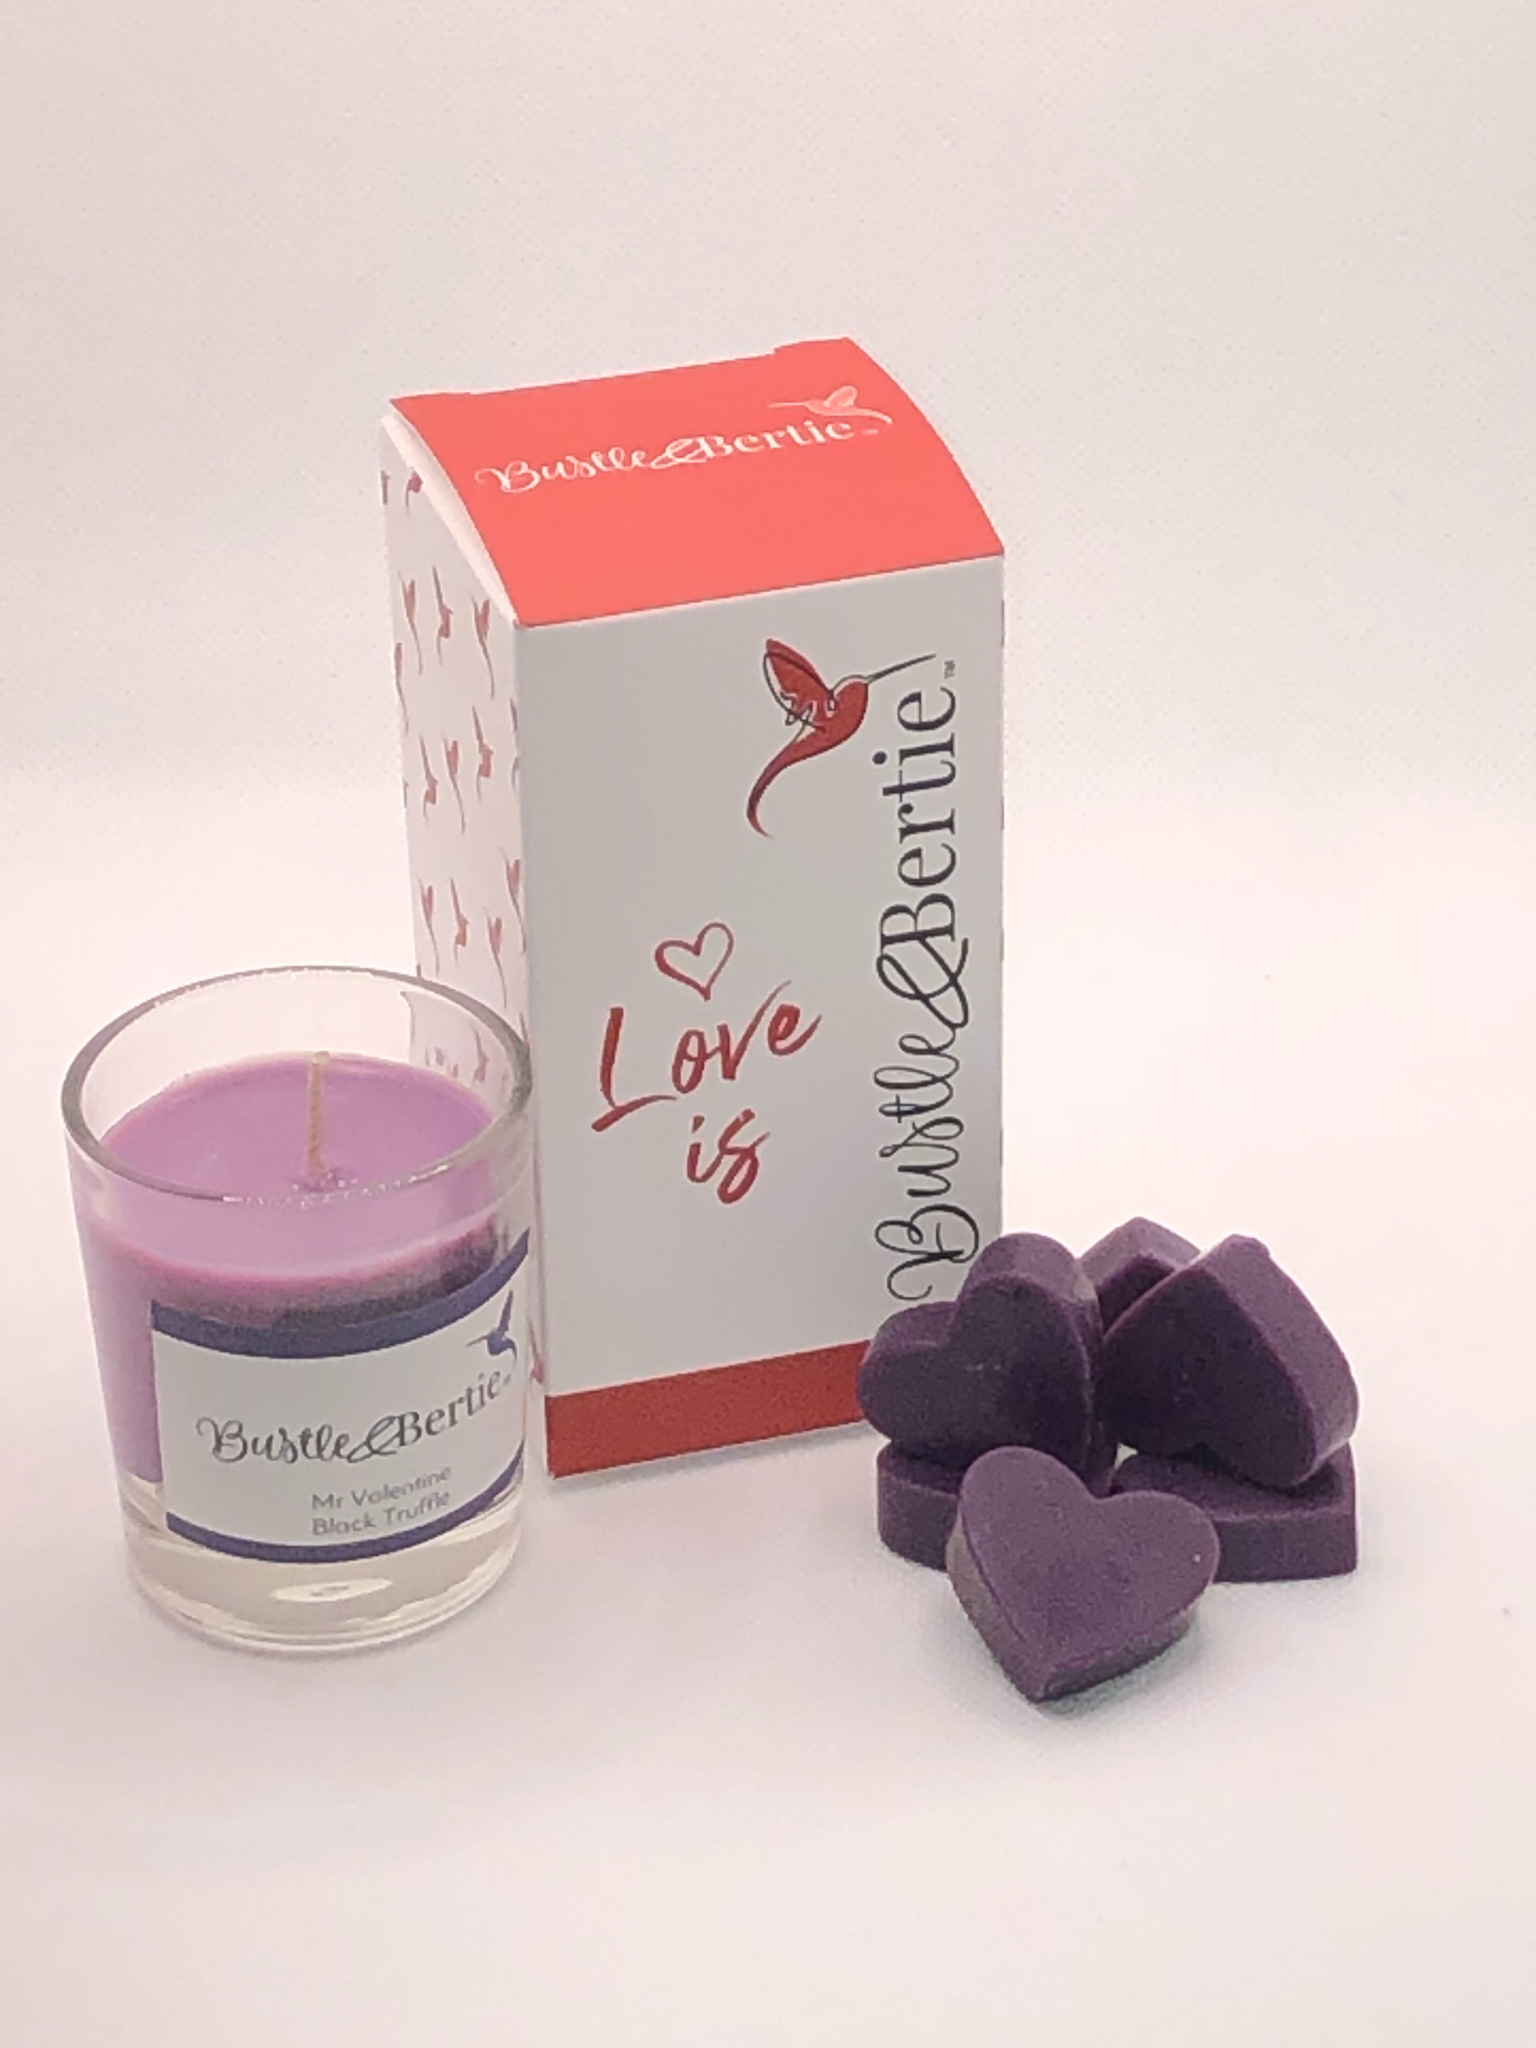 Mr valentine votive candle and heart melts LIMITED EDITION